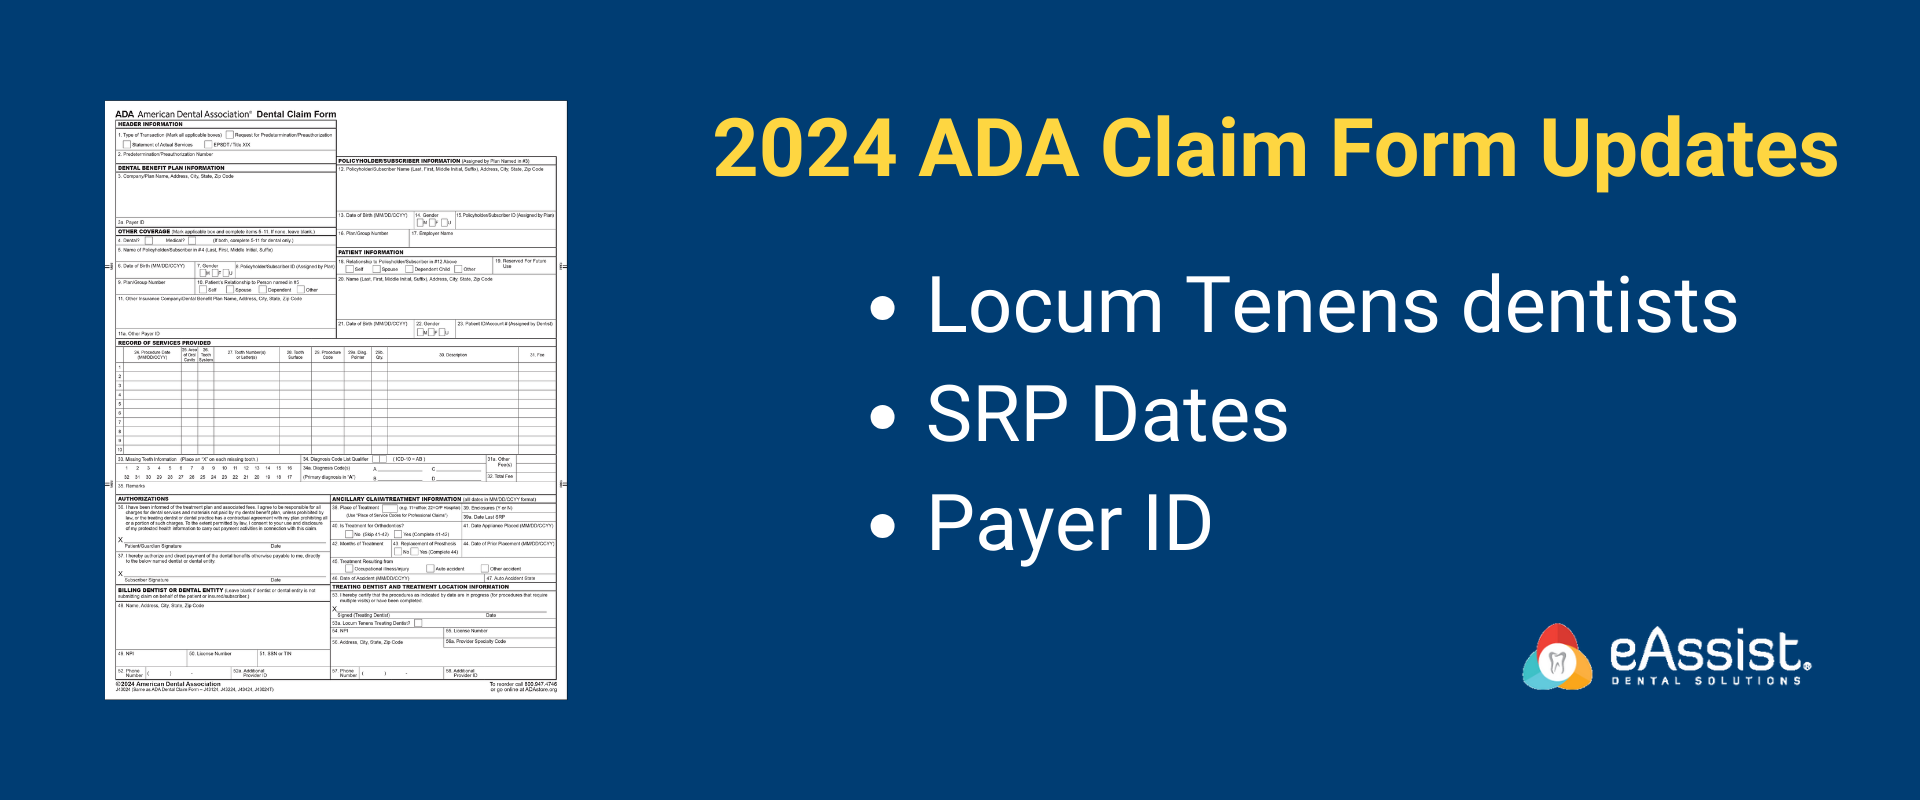 A Guide to the 2024 ADA Claim Form 